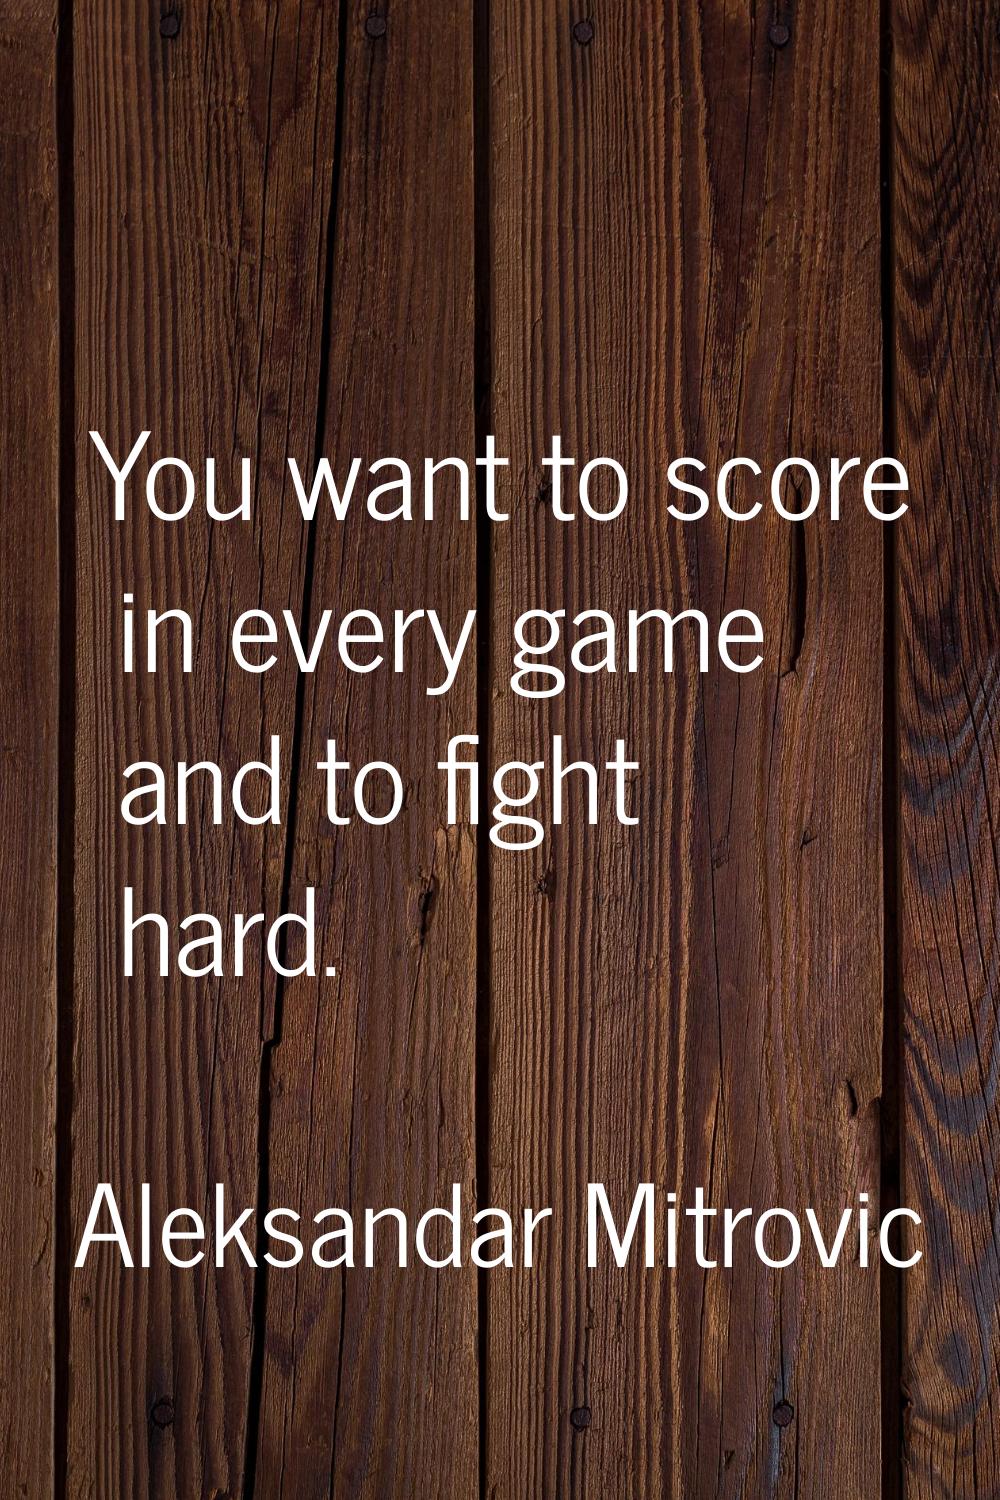 You want to score in every game and to fight hard.